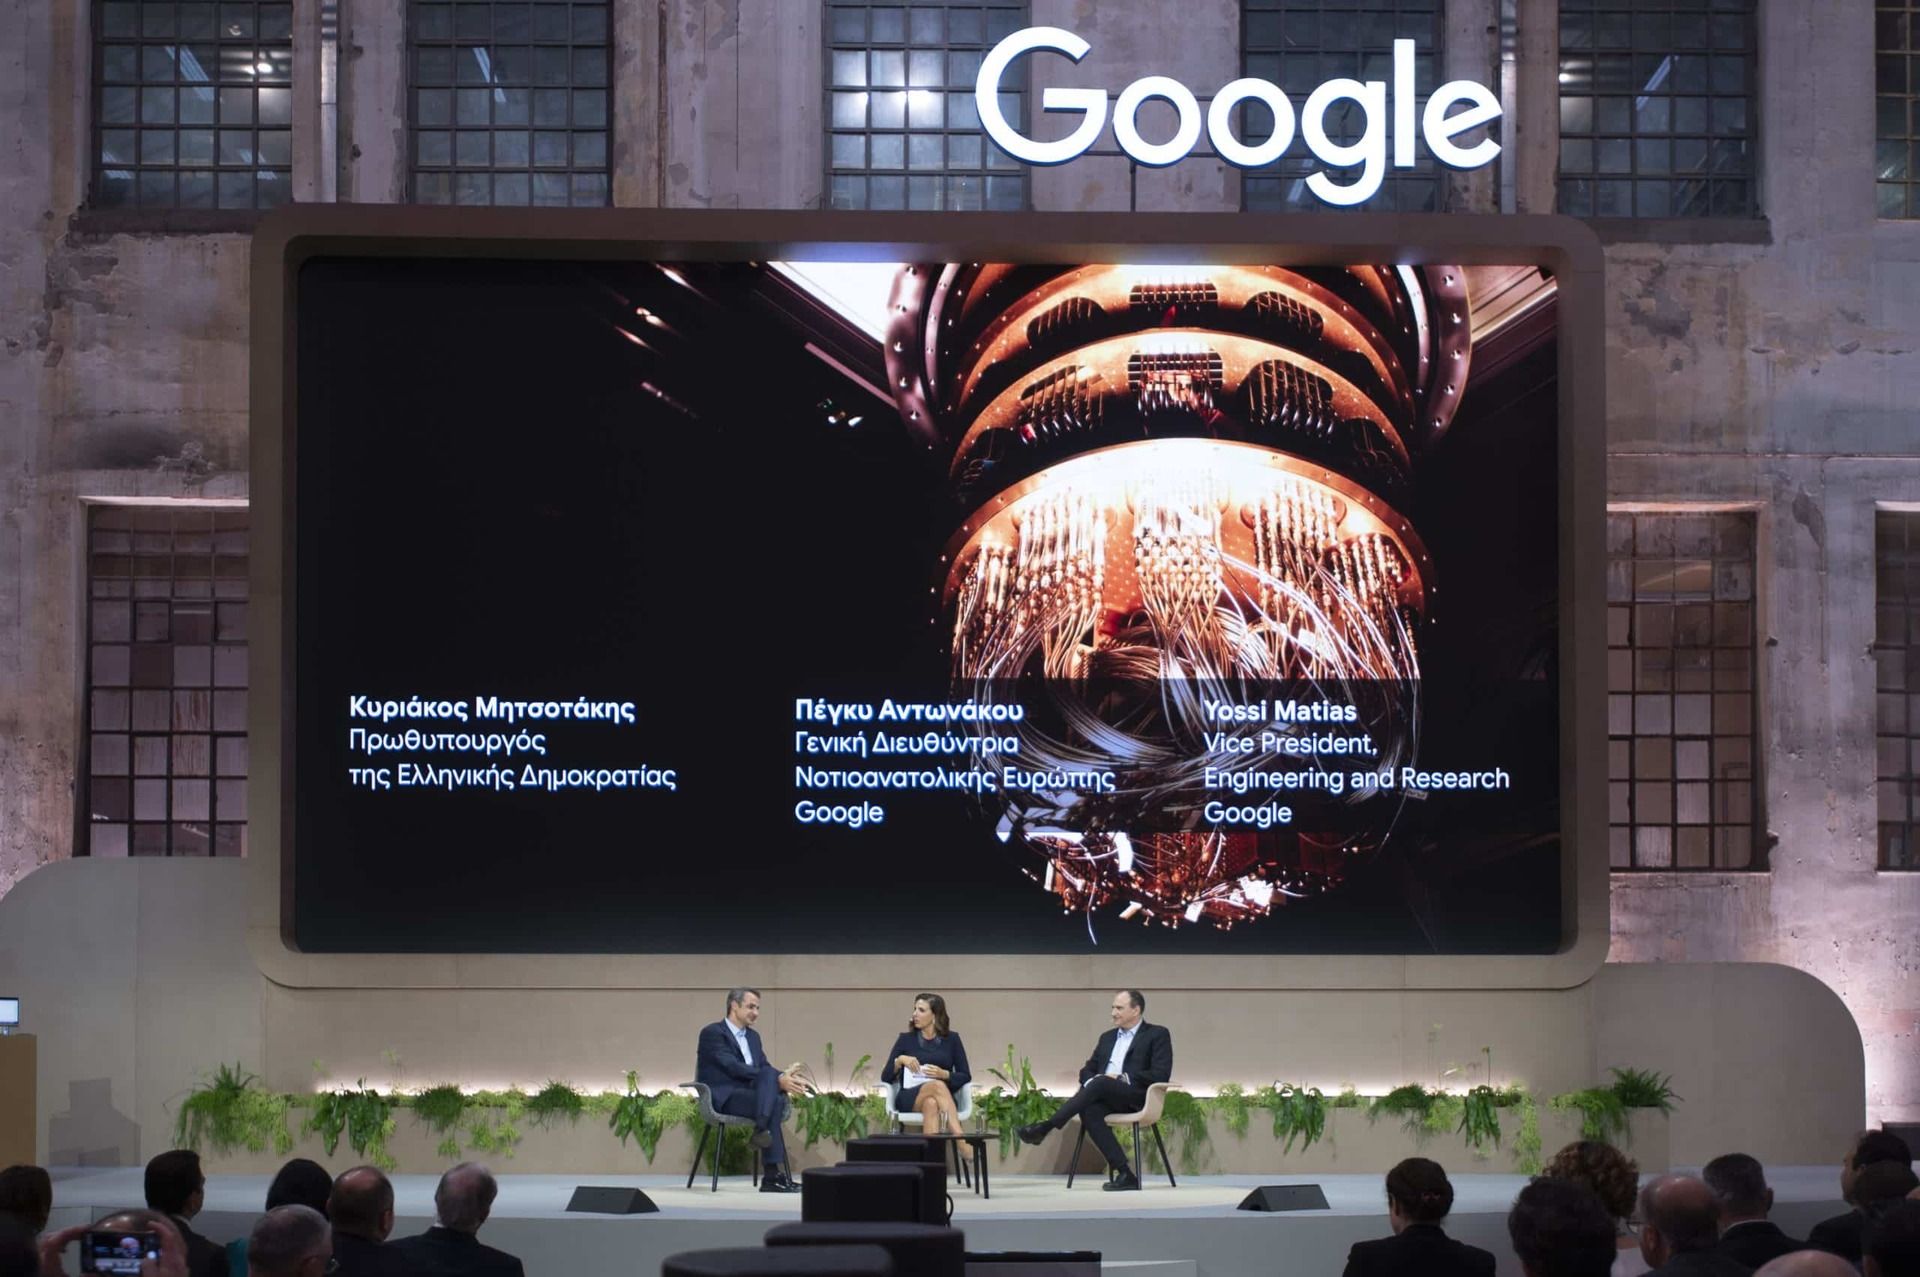 PM Mitsotakis at Google event: Greece aims to become an int’l hub for AI’s code of ethics